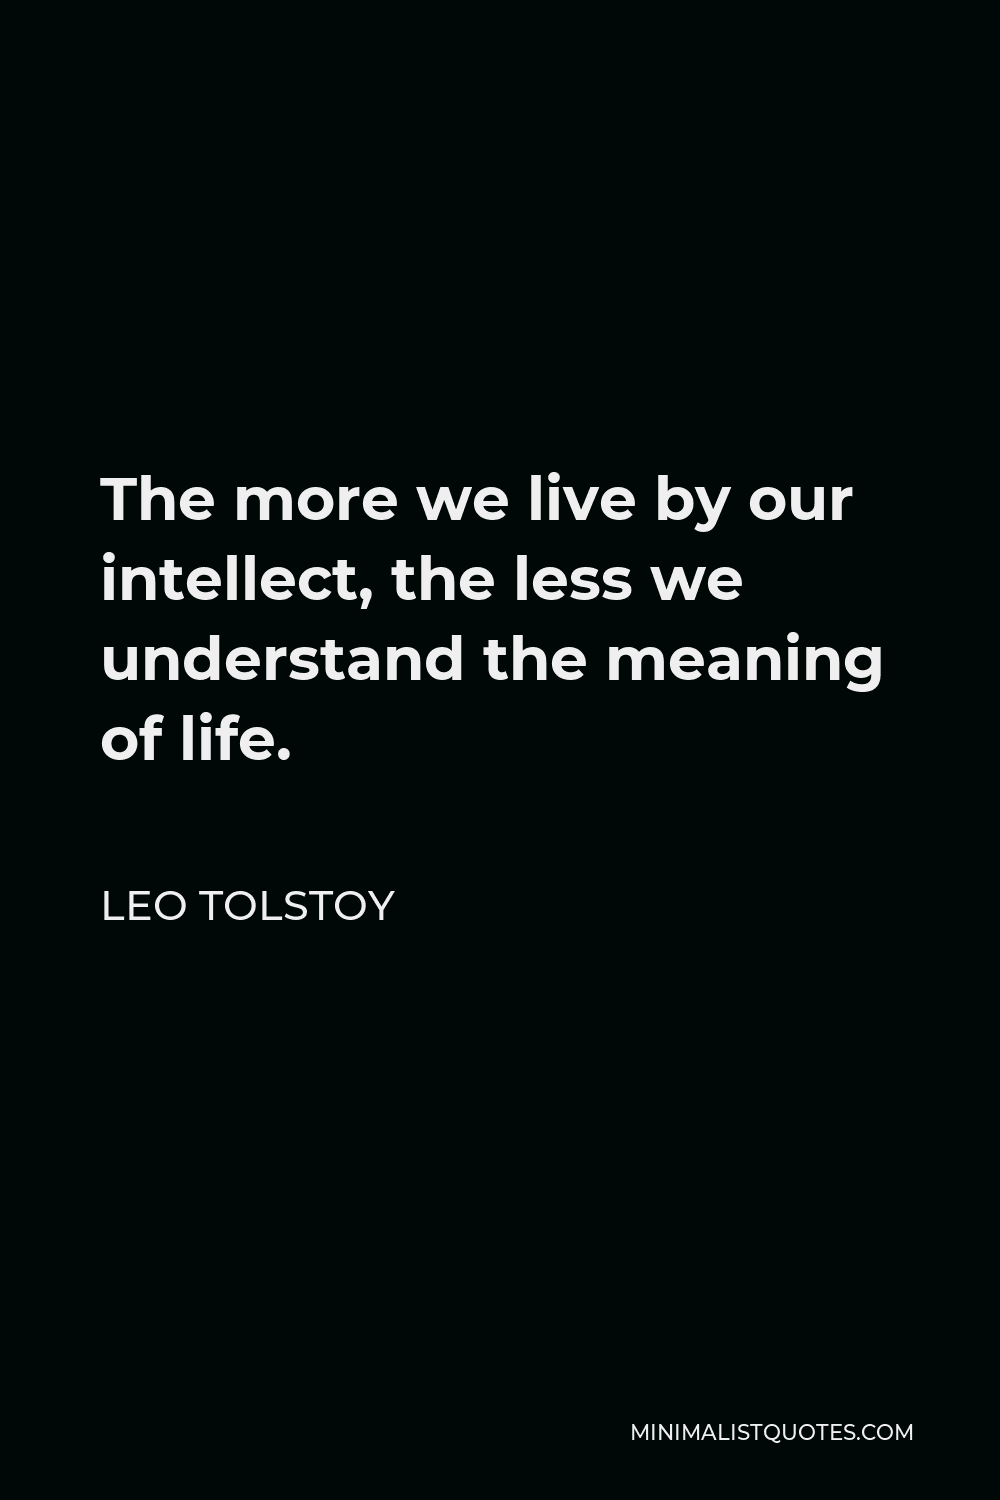 Leo Tolstoy Quote - The more we live by our intellect, the less we understand the meaning of life.